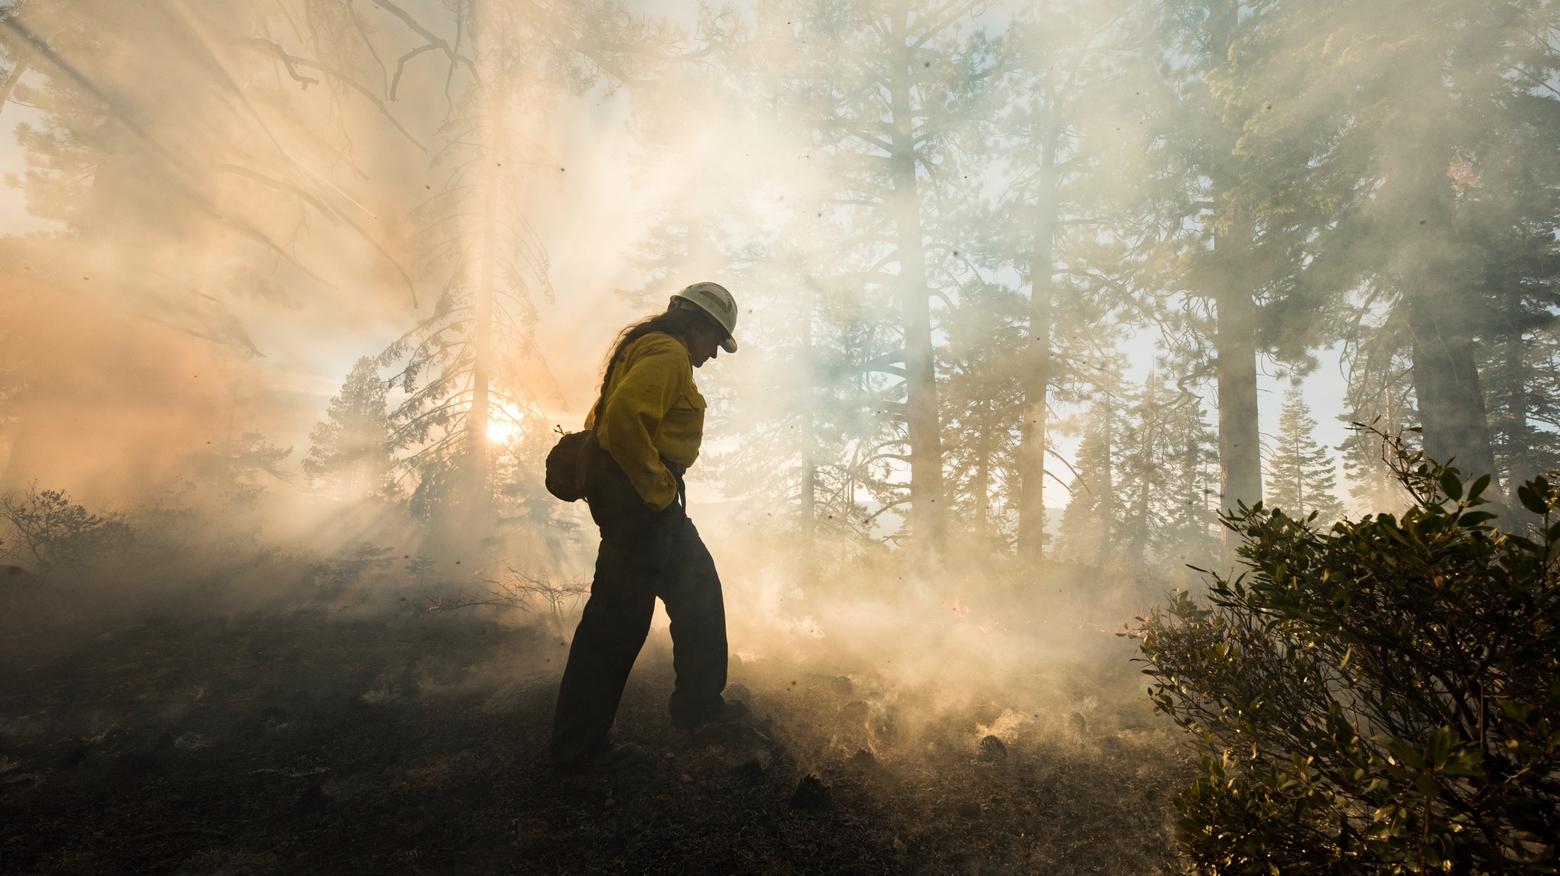 Kelly Martin fought wildland fire with the federal government for 34 years. Today, as a cofounding member of Grassroots Wildland Firefighters, she fights for fair pay and holistic well-being for firefighters. Photo by Sherman Hogue